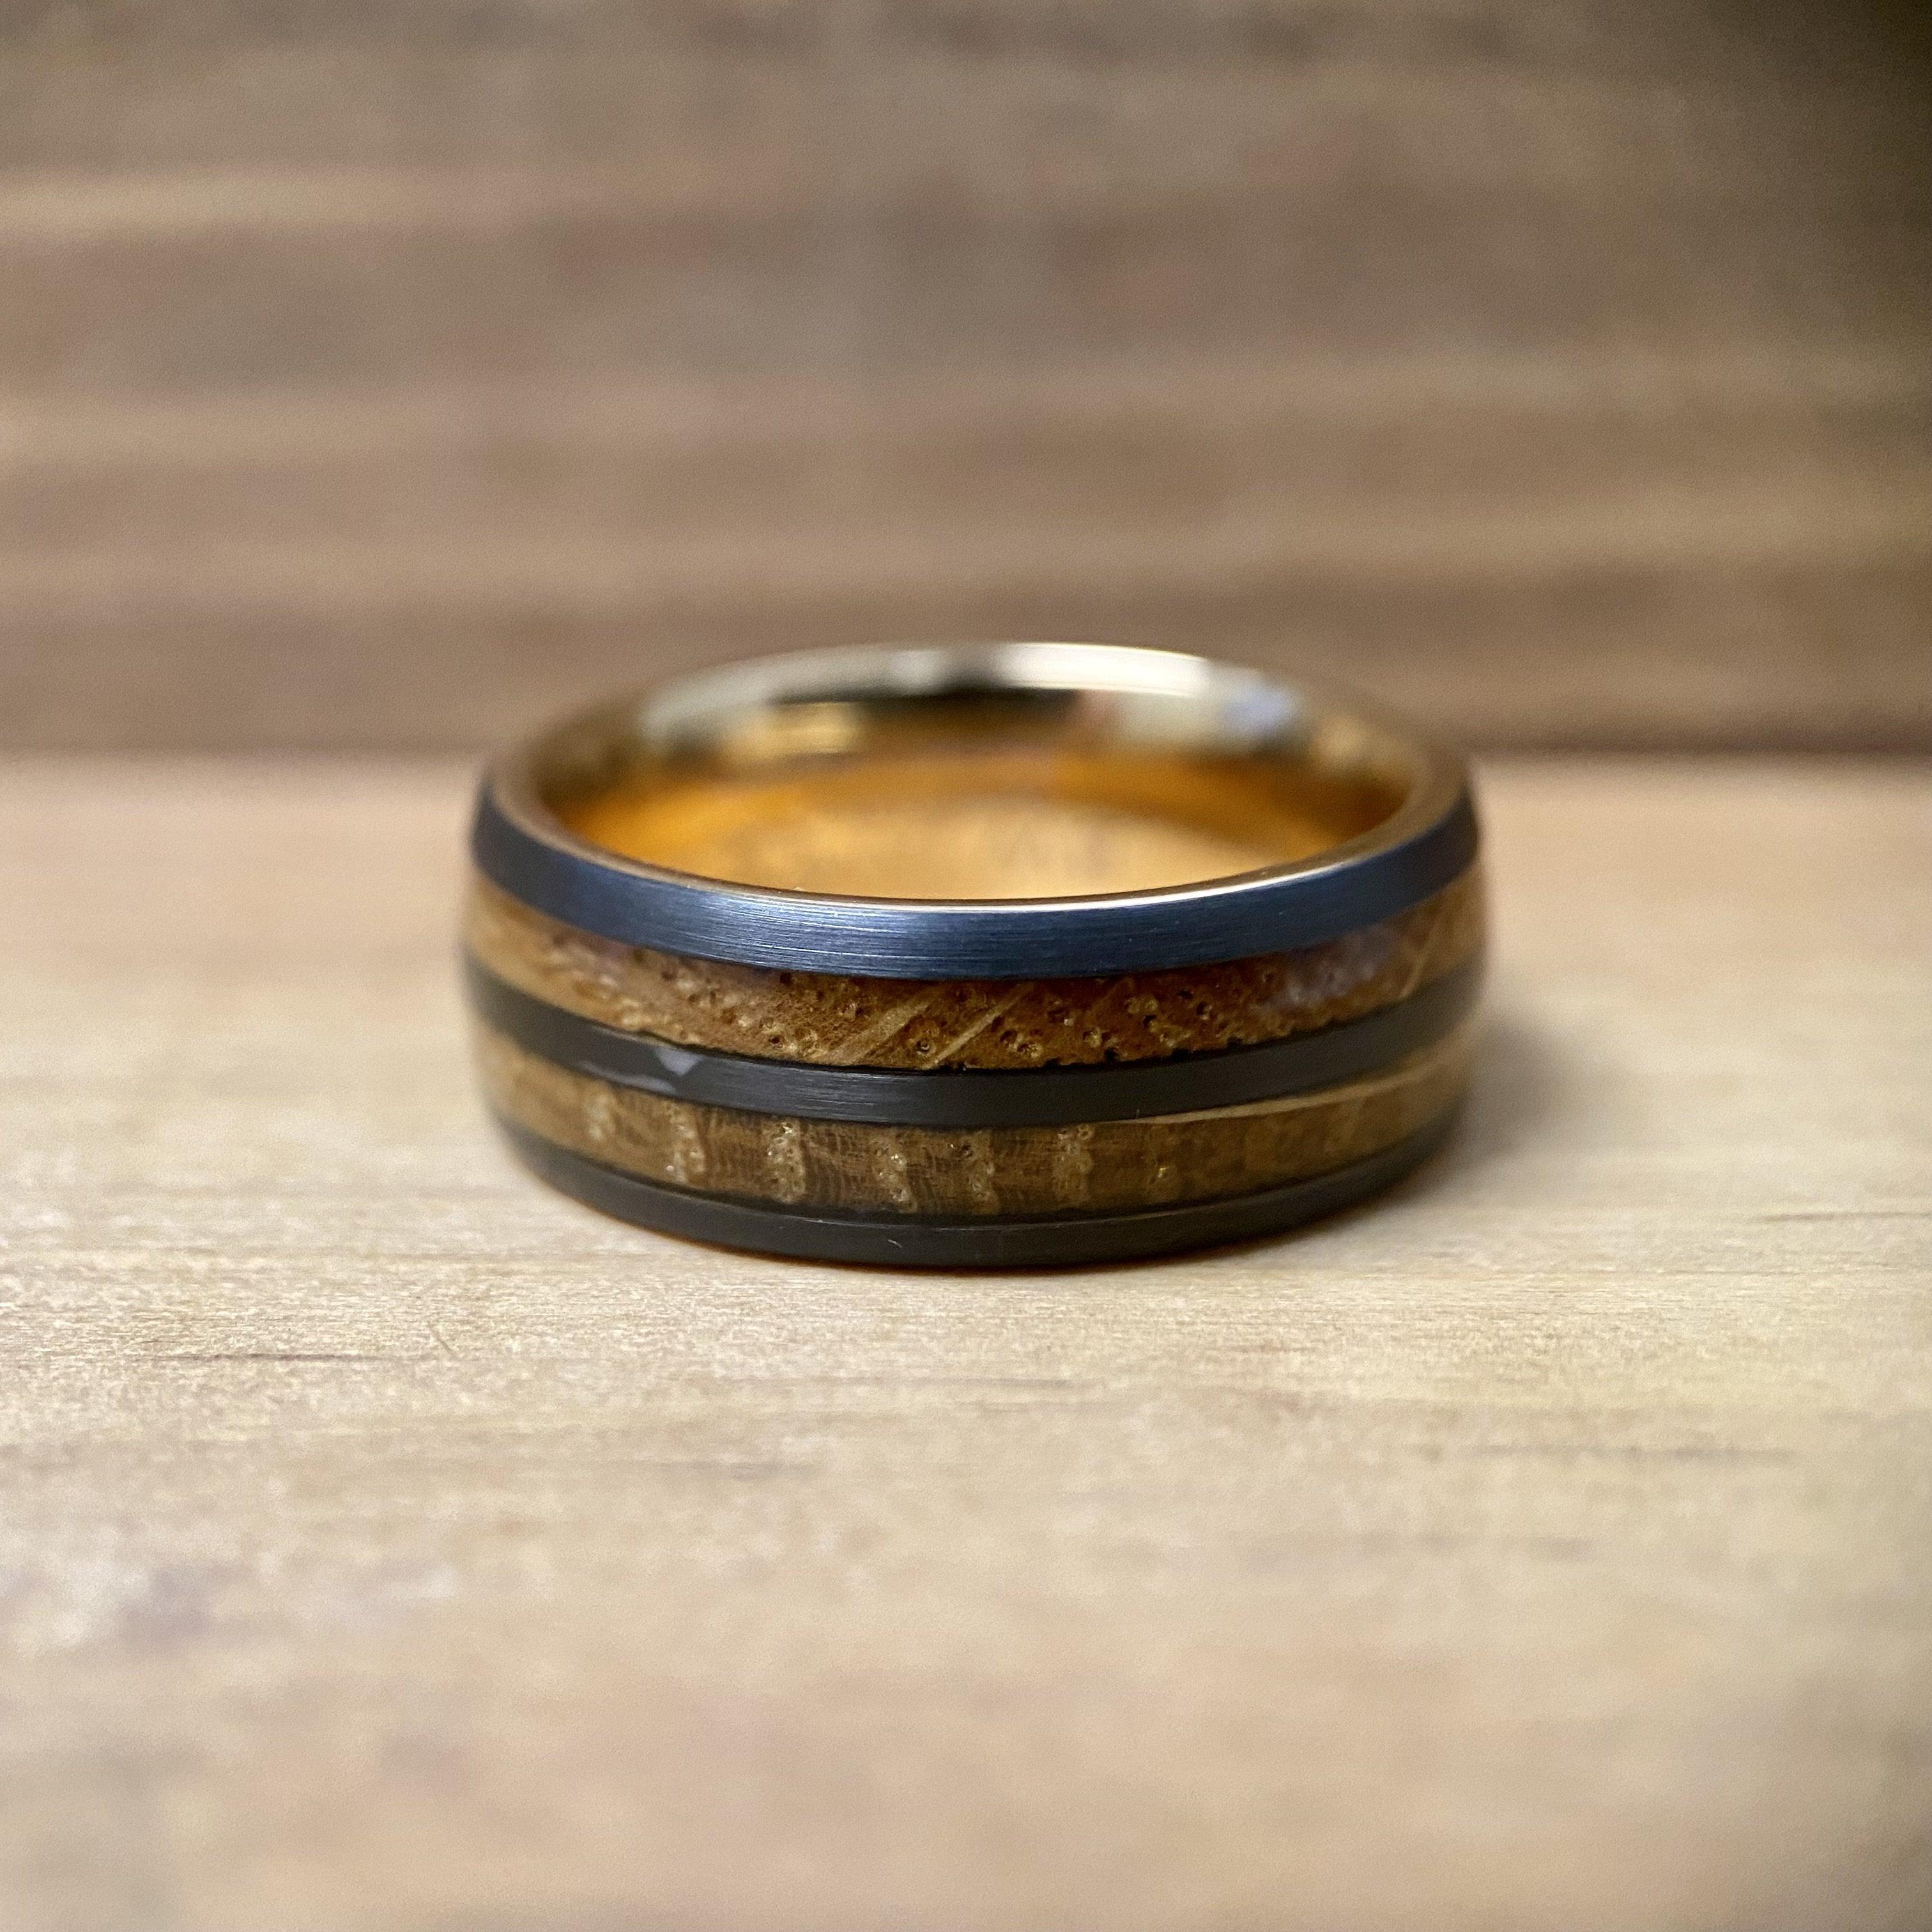 BW James Jewelers ALT Wedding Band “The Whiskey” Tungsten Ring With Reclaimed Bourbon Whiskey Barrel Wood And Rose Gold Color